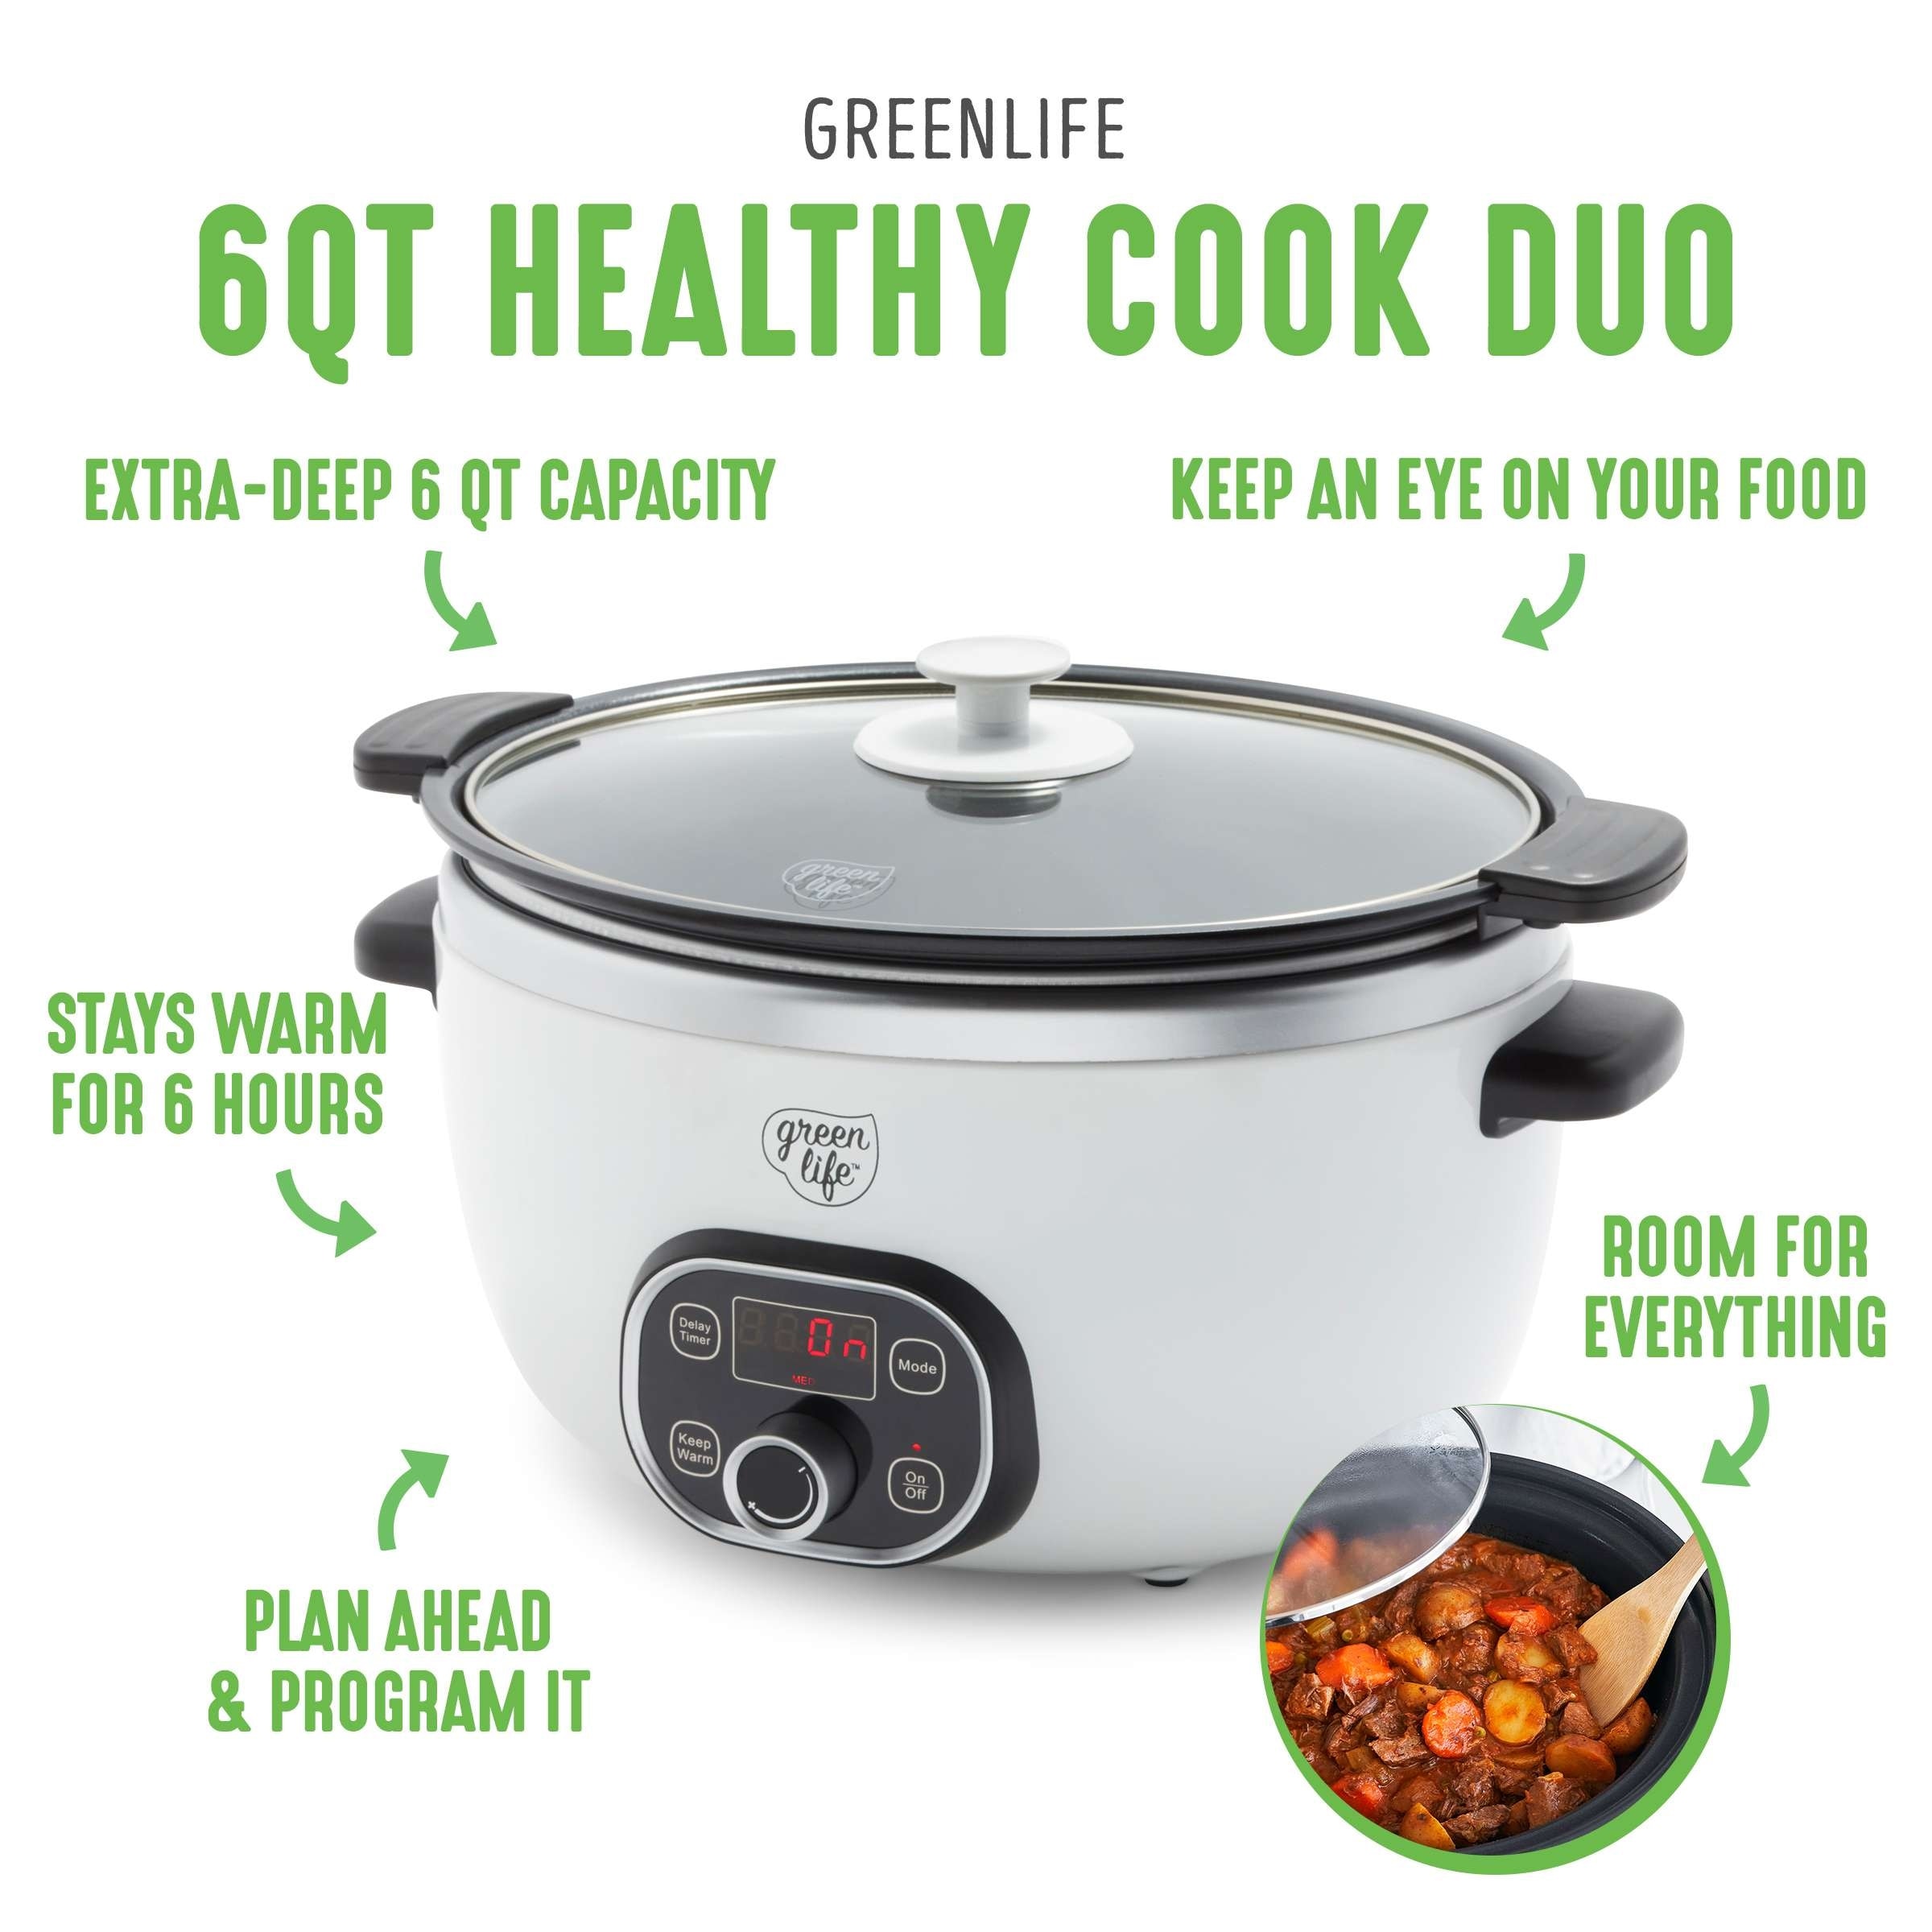 GreenLife Healthy Ceramic Nonstick, 6QT Slow Cooker, Turquoise